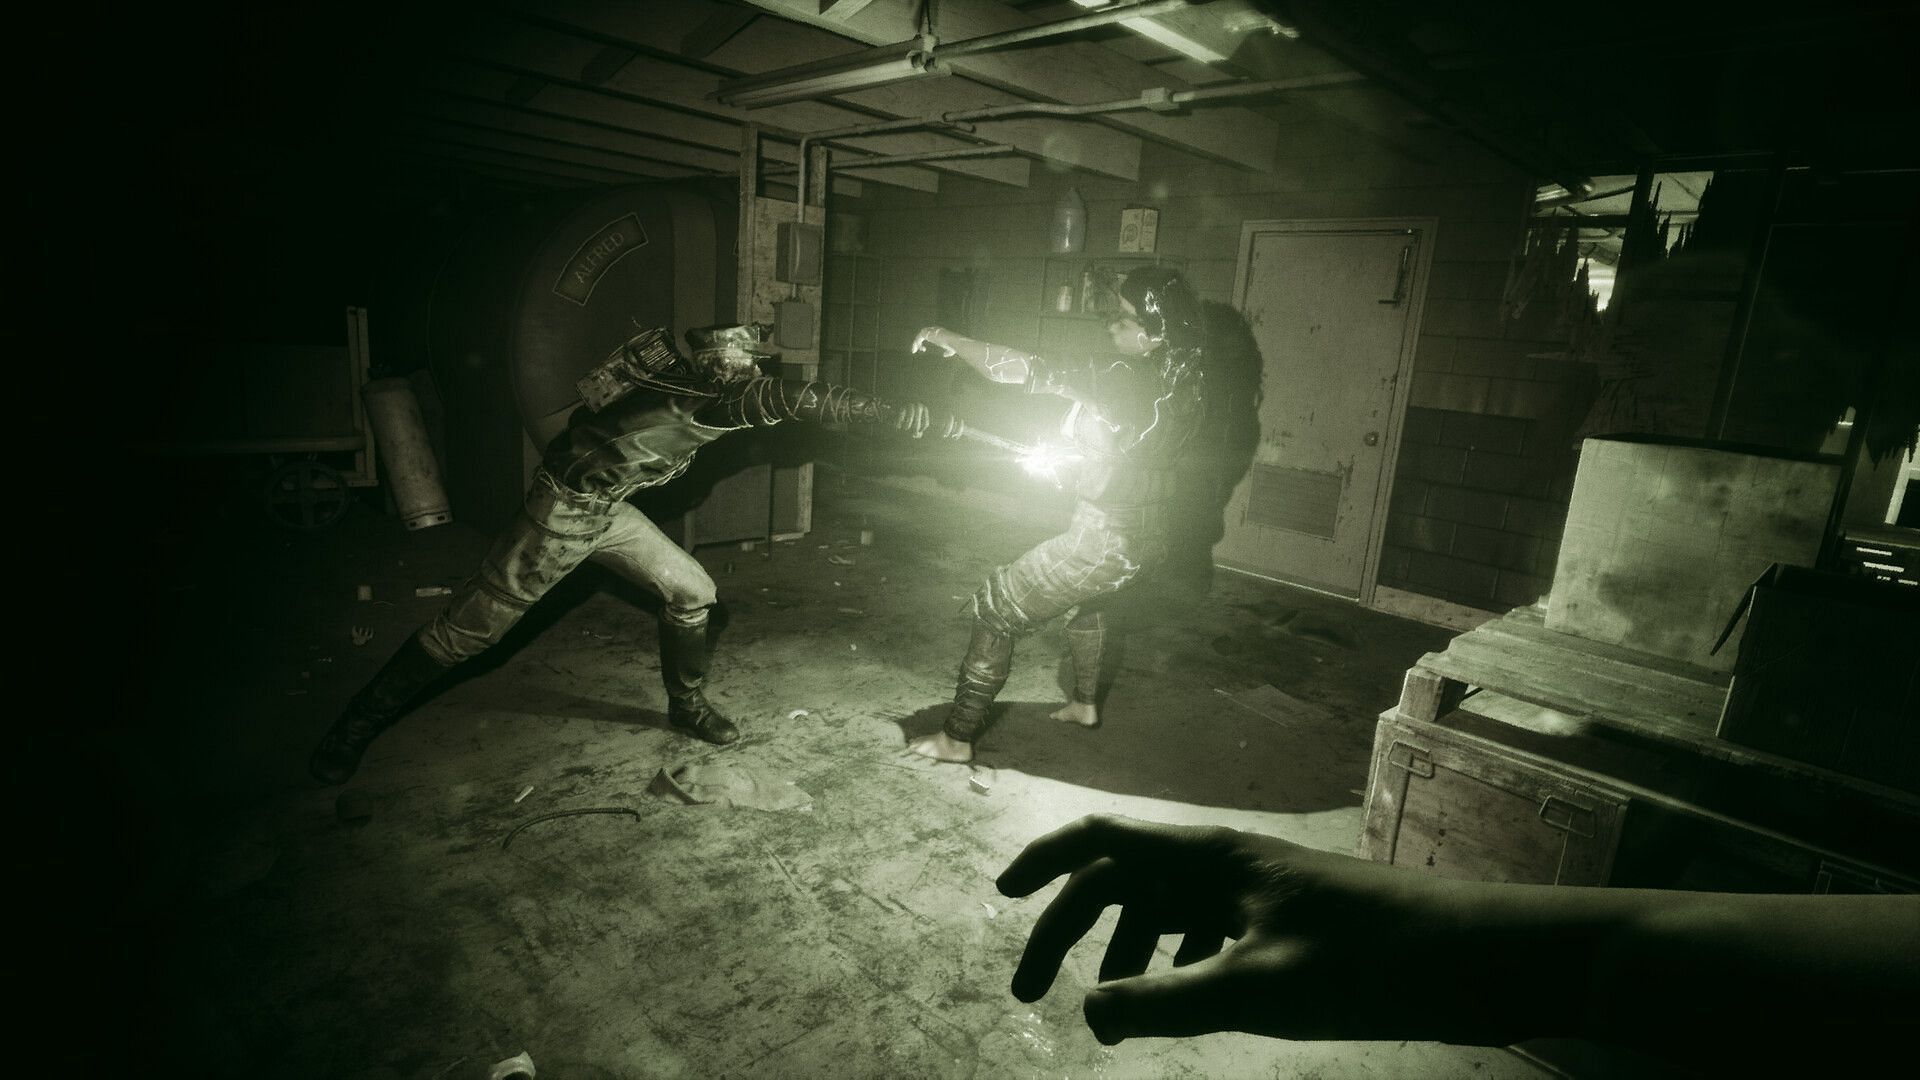 The Outlast is one of the most popular horror game franchises (Image via Red Barrels)